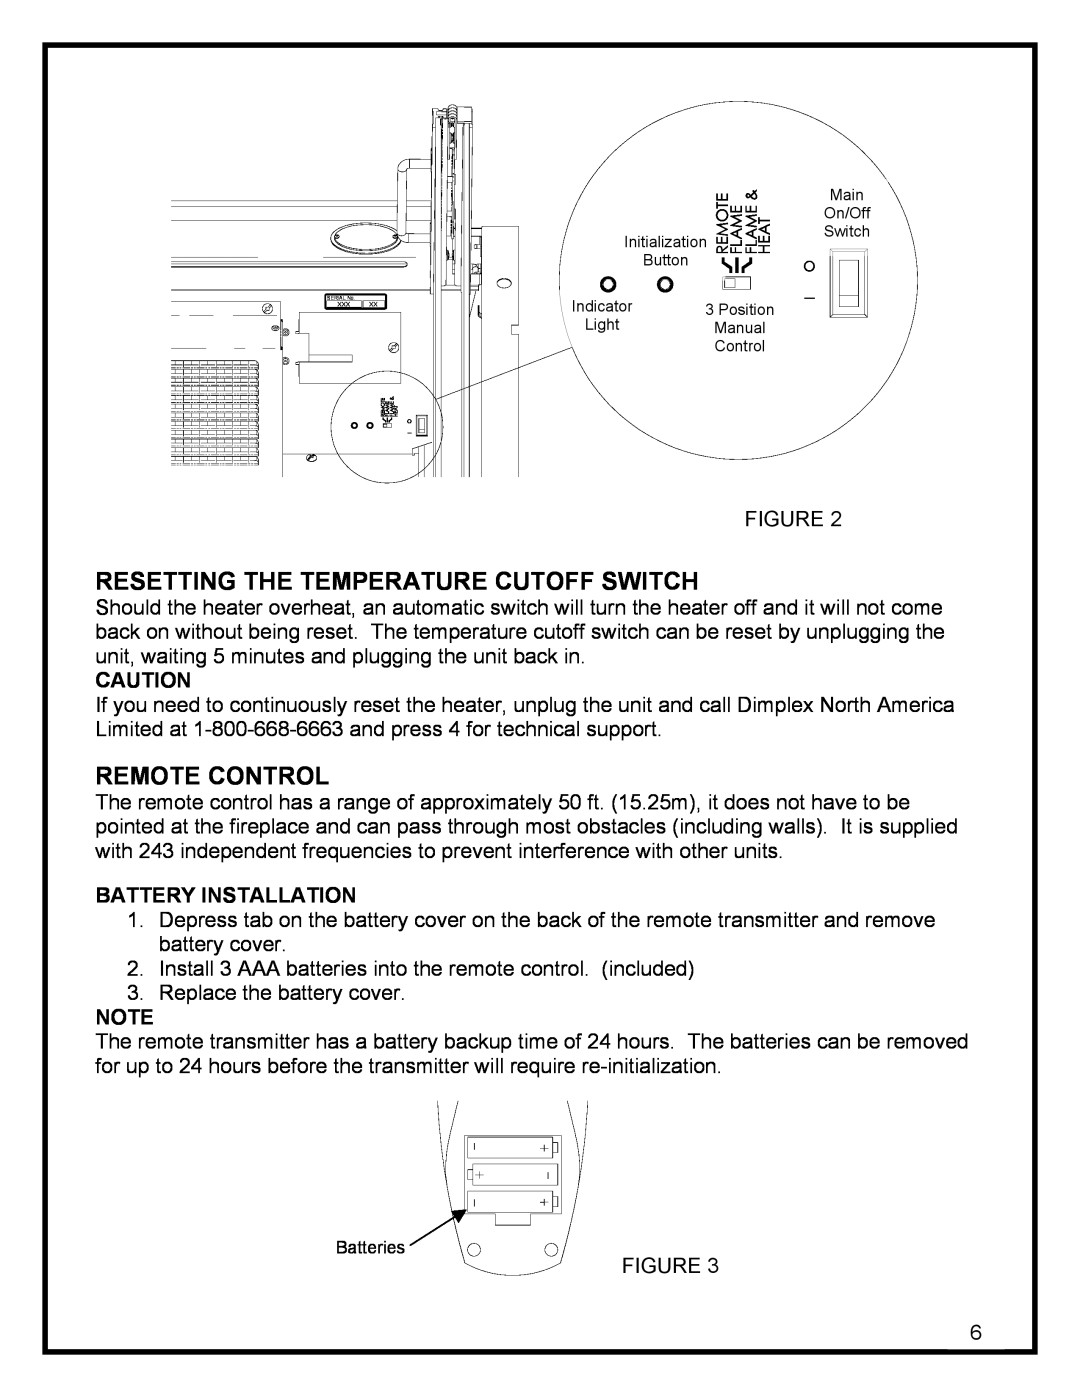 Dimplex DF3215 manual Resetting The Temperature Cutoff Switch, Remote Control, Battery Installation 